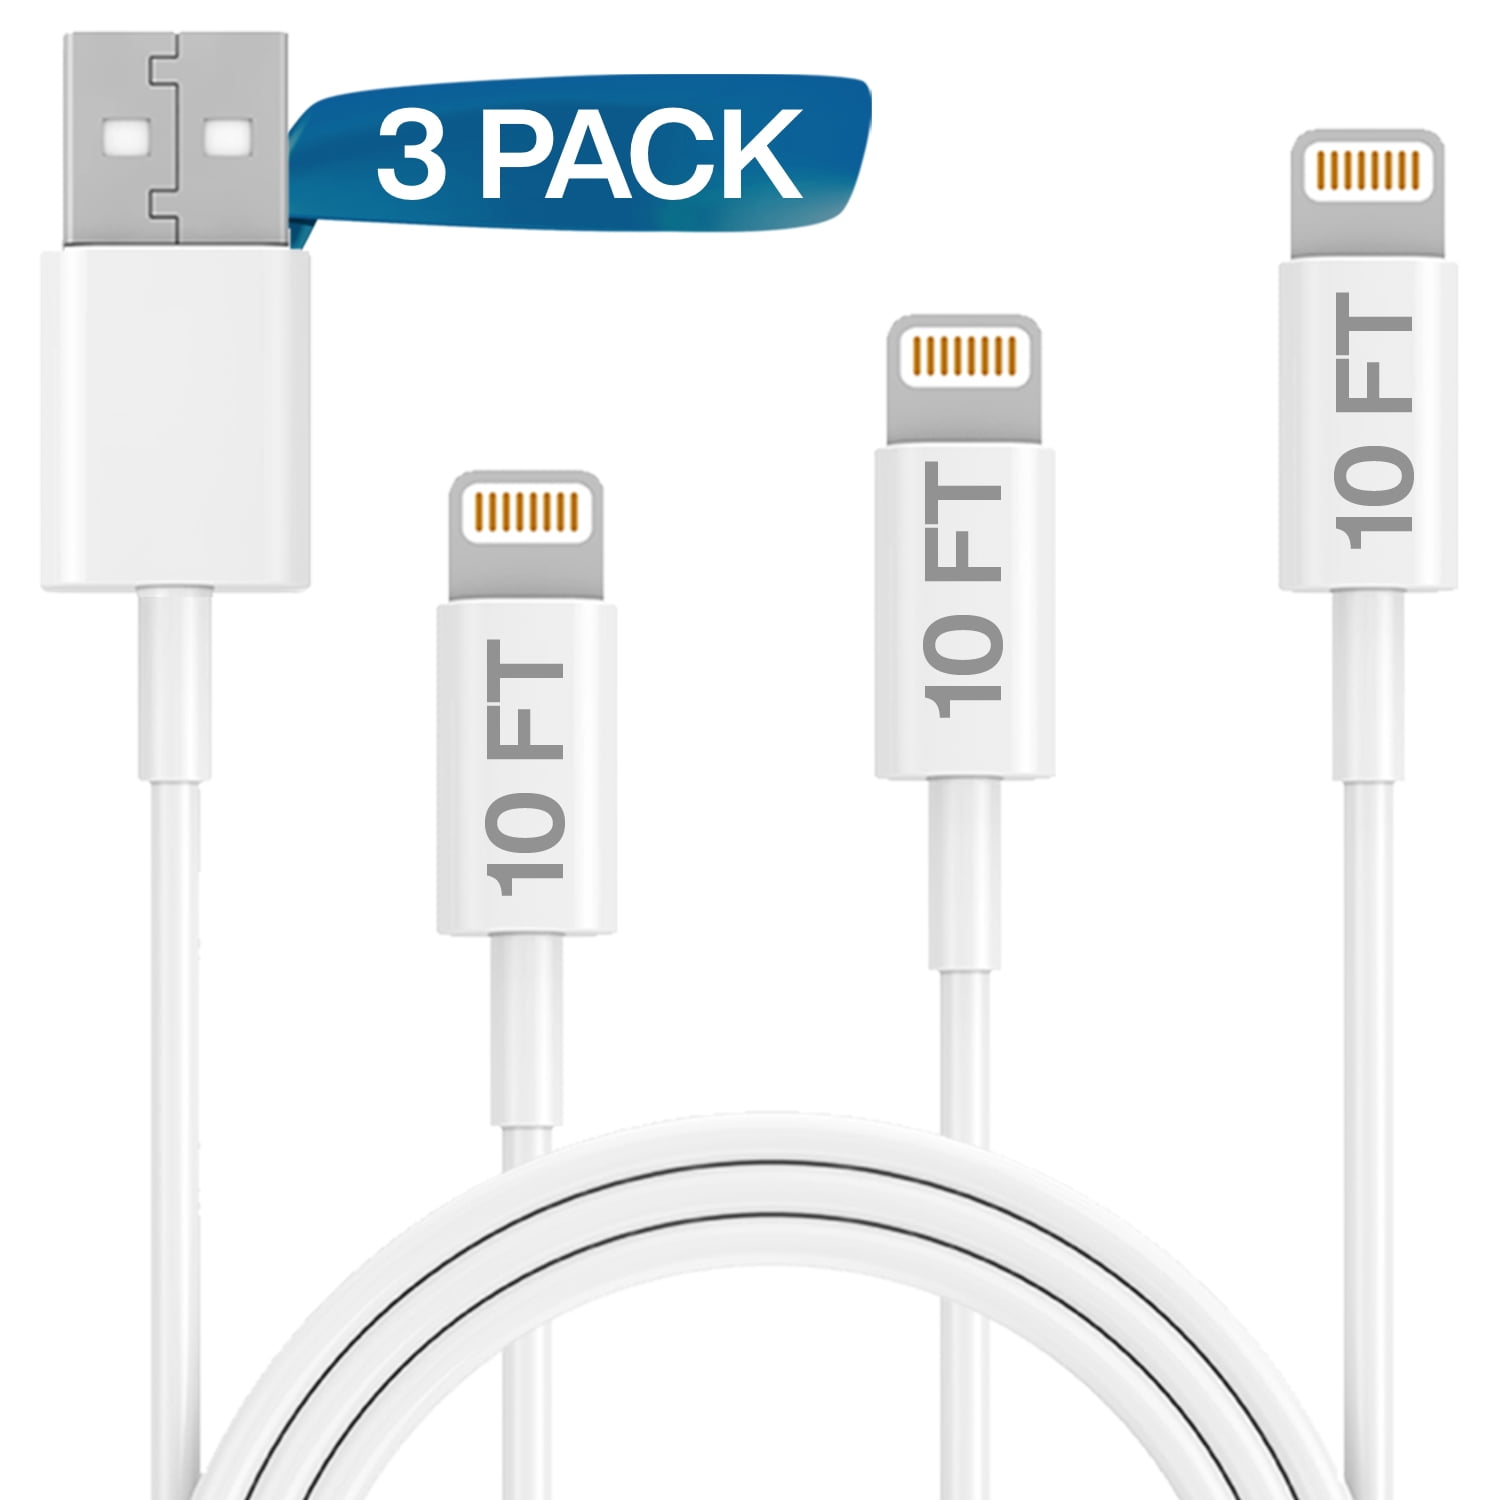 Compatible with Apple iPhone Xs,Xs Max,XR,X,8,8 Plus,7,7 Plus,6S,6S Plus,iPad Air,Mini/iPod Touch/Case Fast Charging & Syncing Cord Infinite Power 4 Pack 10FT USB Cable iPhone Lightning Cable Set 